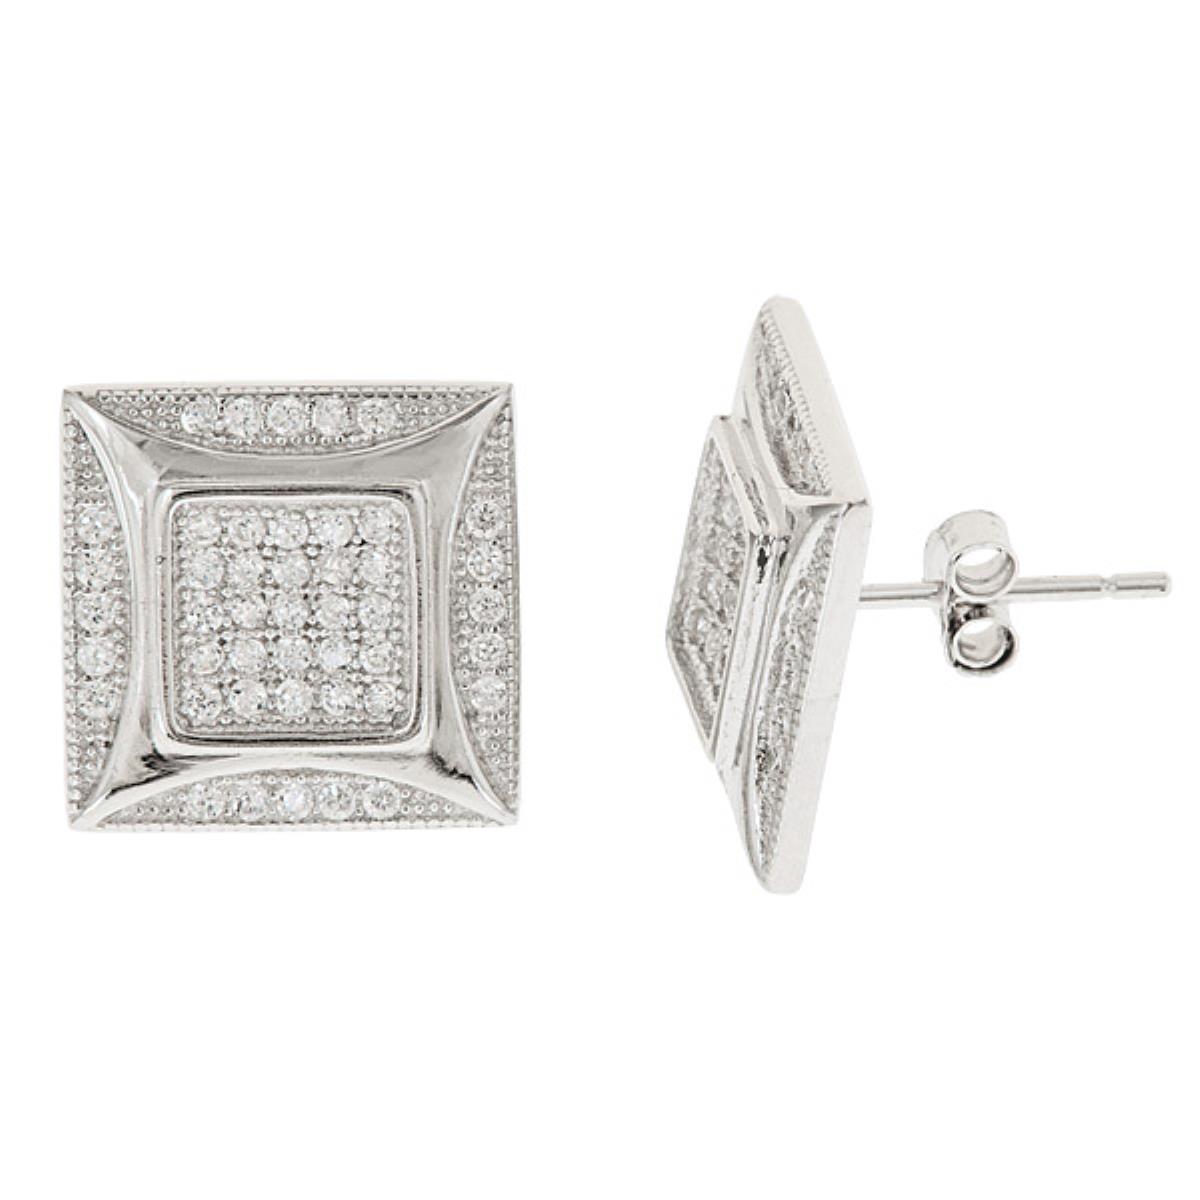 Sterling Silver 13x13mm Micropave Square Stud Earring